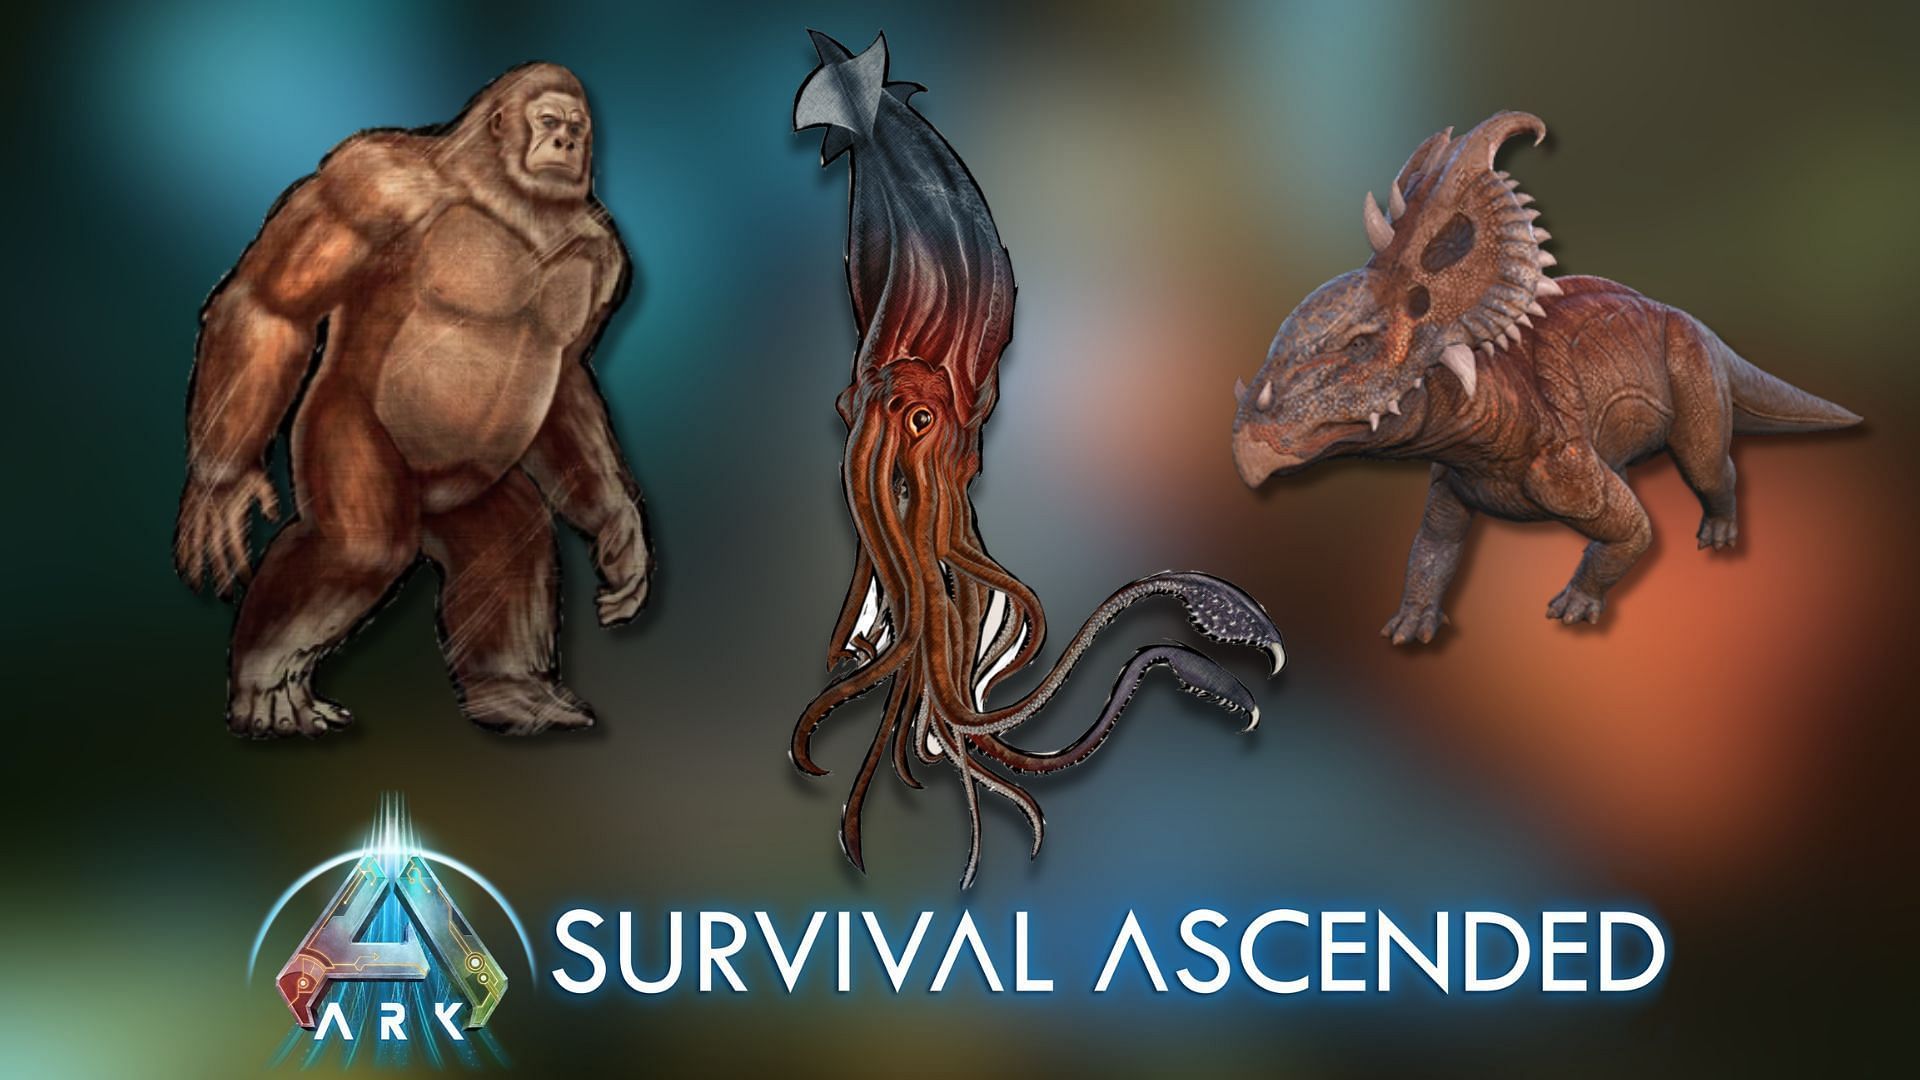 Ark Survival Ascended tames with unique quirks